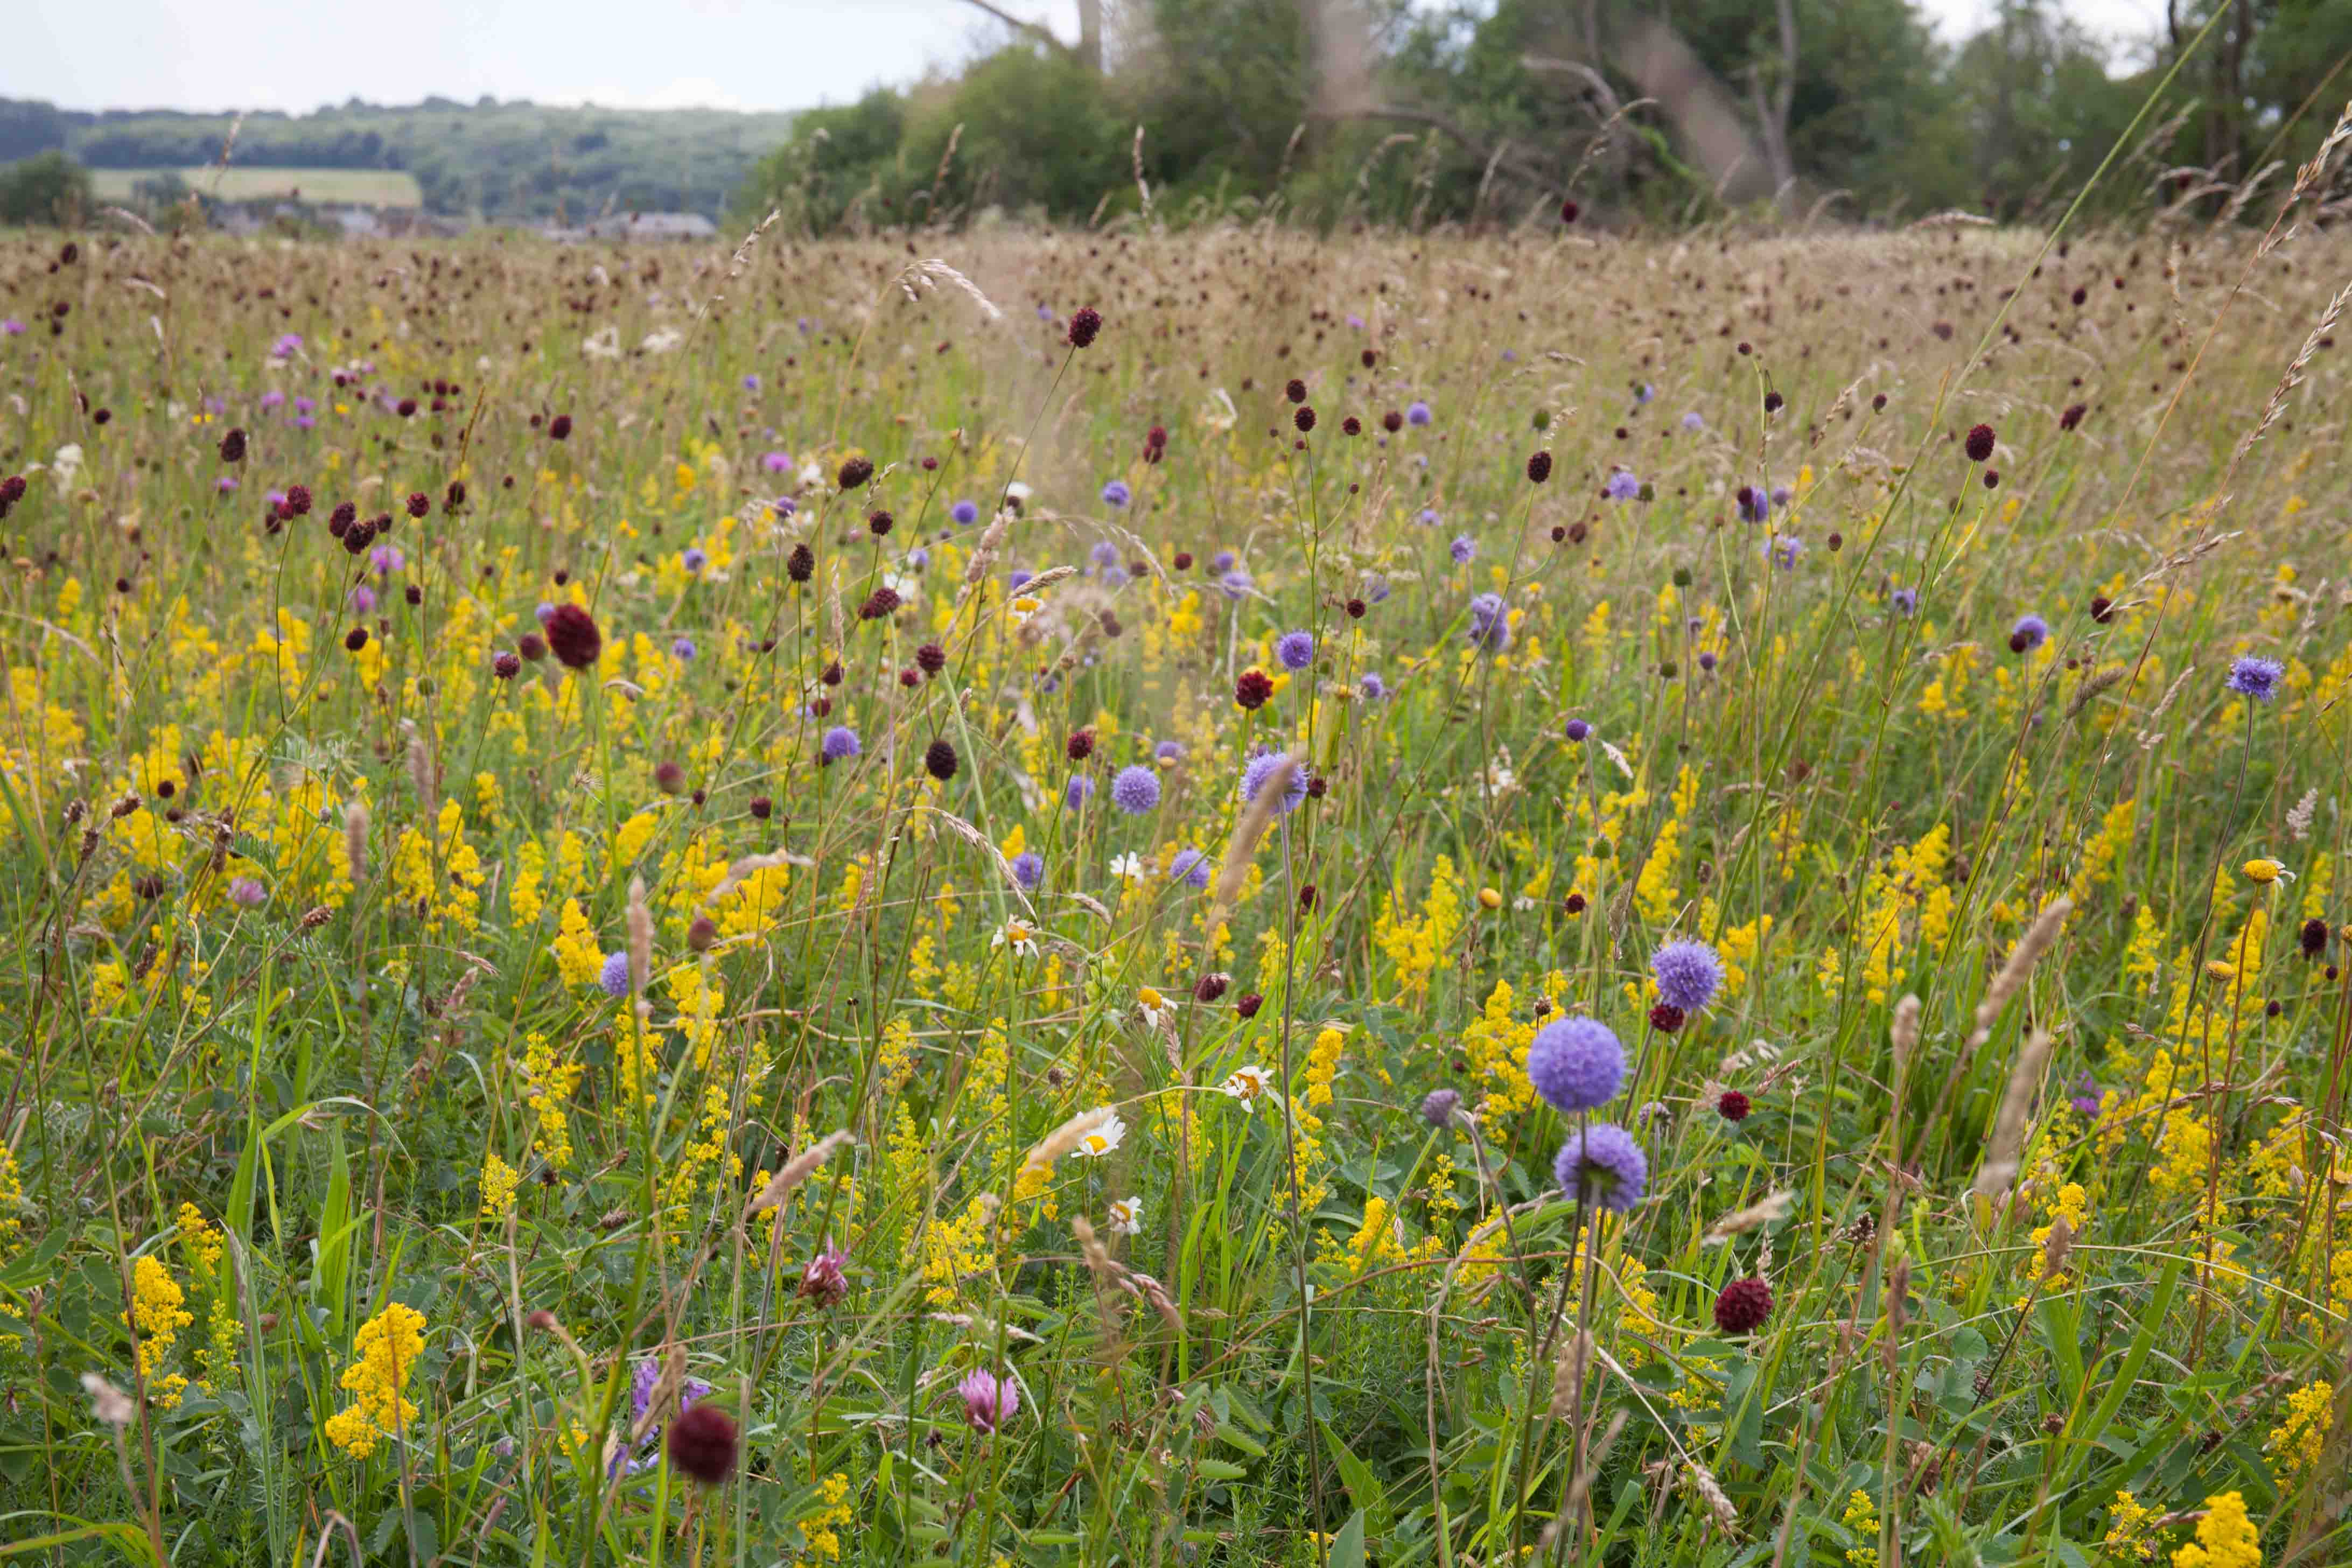 Come and picnic in Long Mead's Wildflower Meadow and help pot on this year's wildflowers